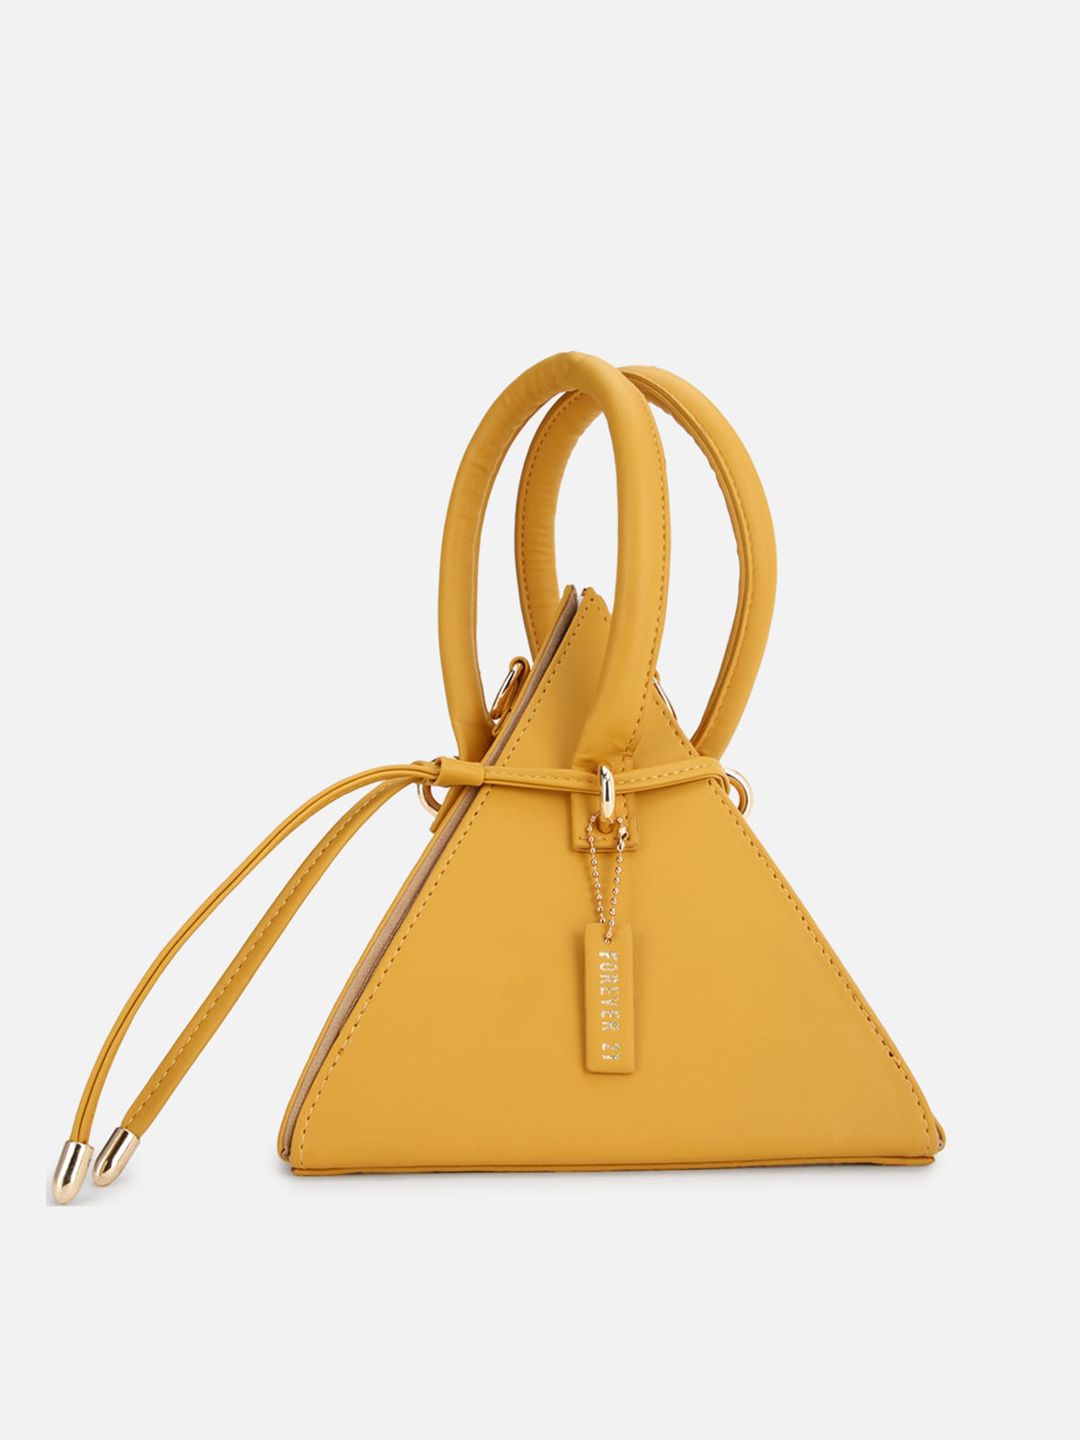 FOREVER 21 Yellow Colourblocked PU Structured Handheld Bag Price in India